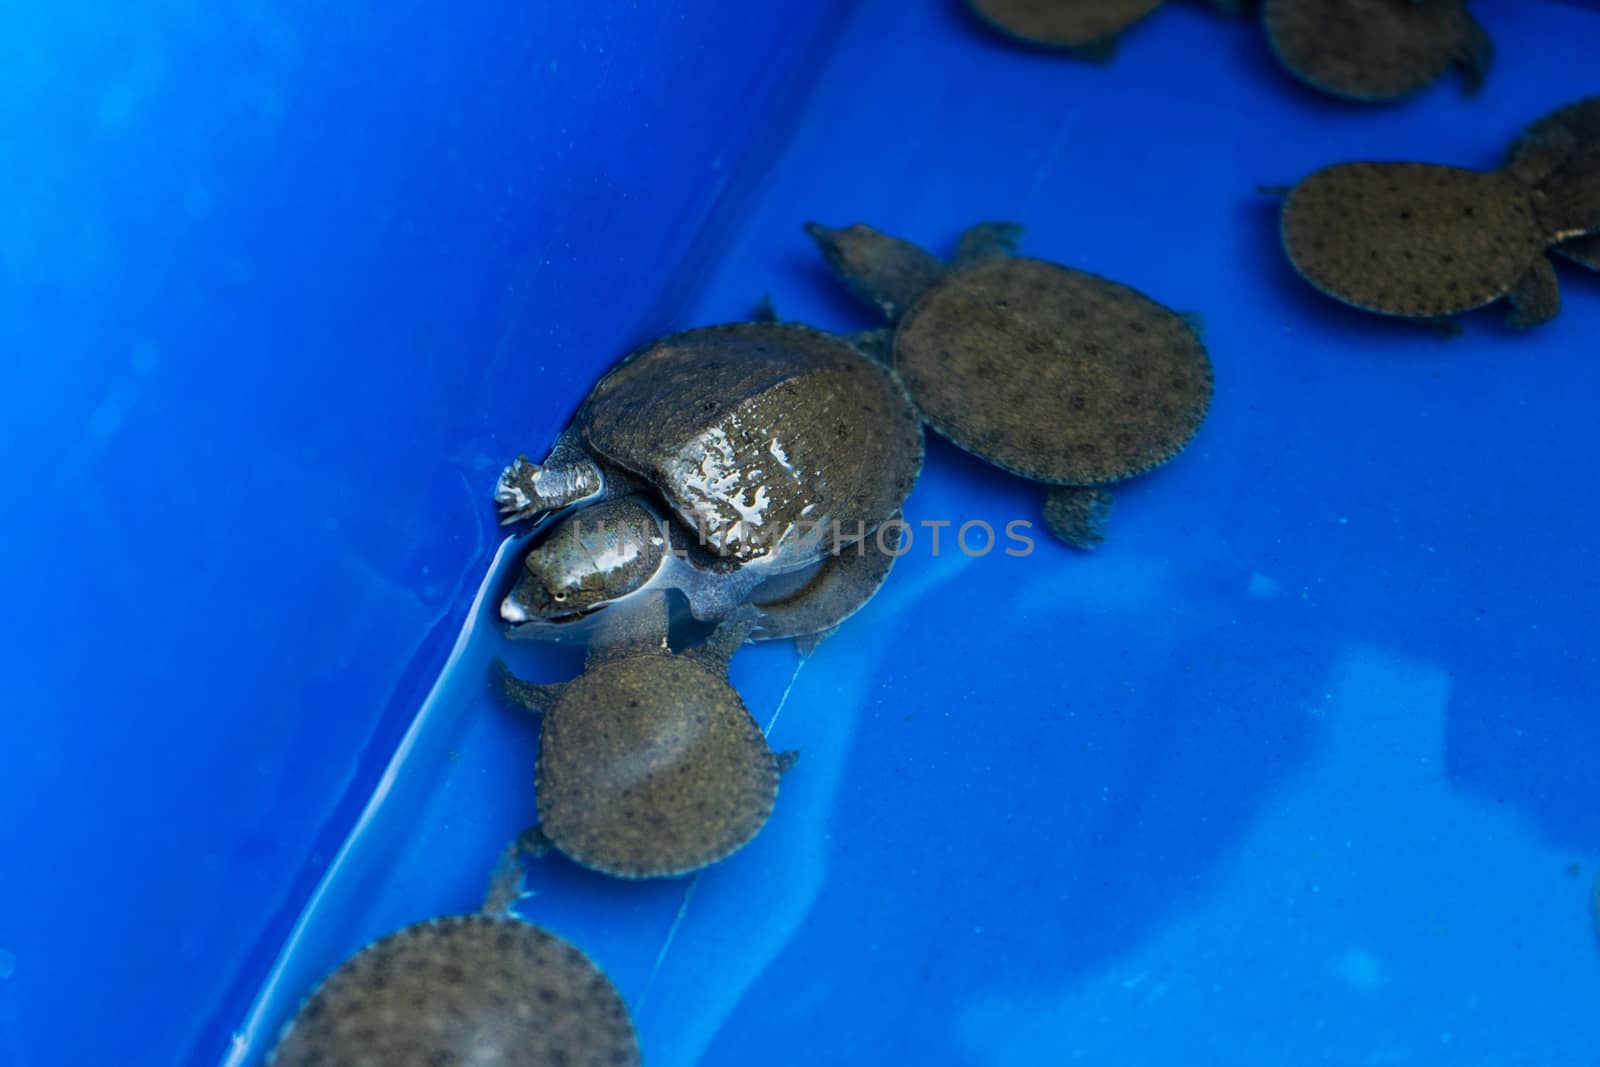 Turtles in a blue basin. Turtles will be released. Rescued turtles by Try_my_best